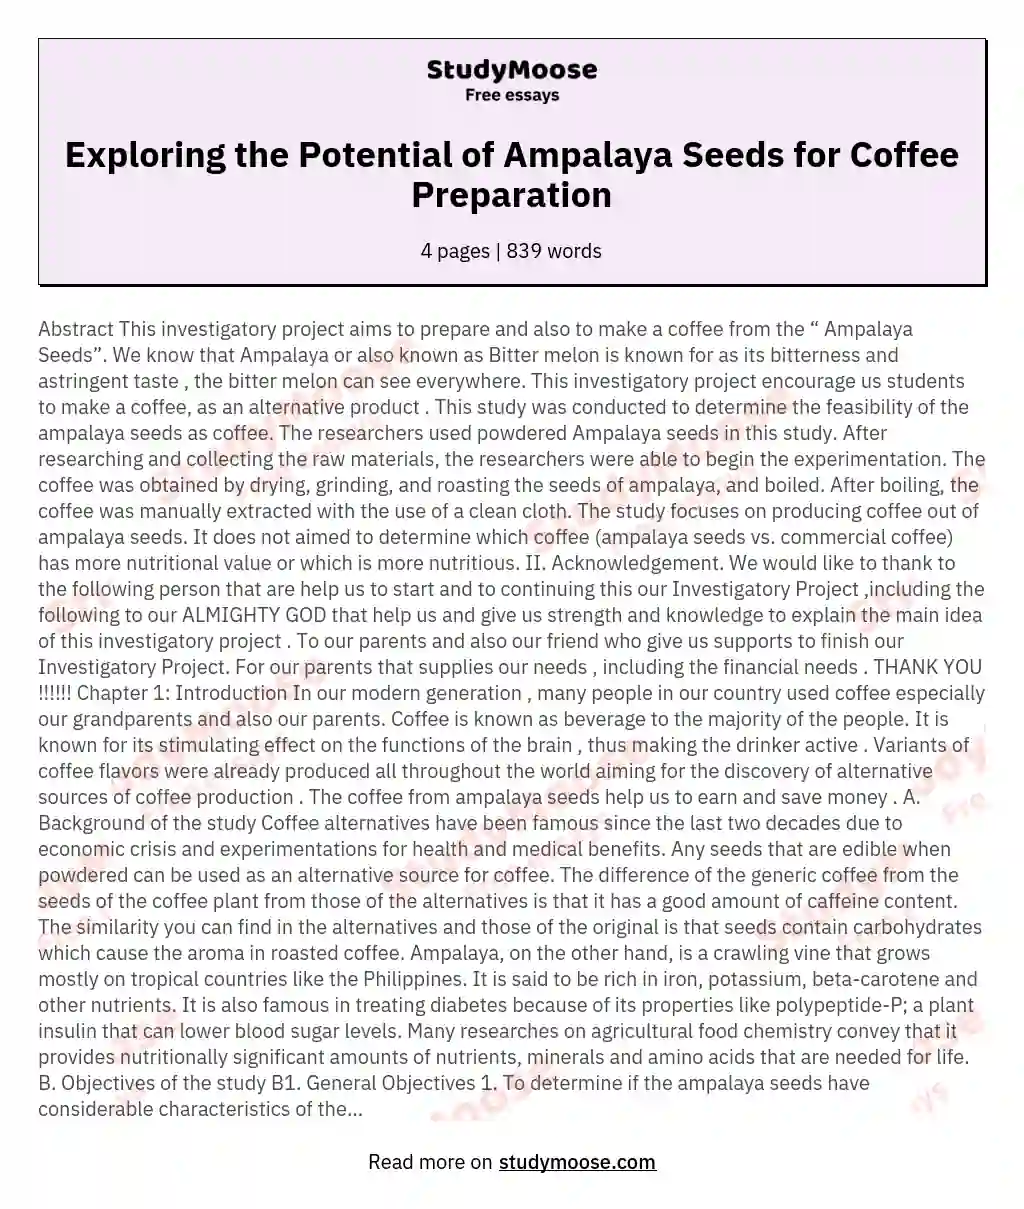 Exploring the Potential of Ampalaya Seeds for Coffee Preparation essay